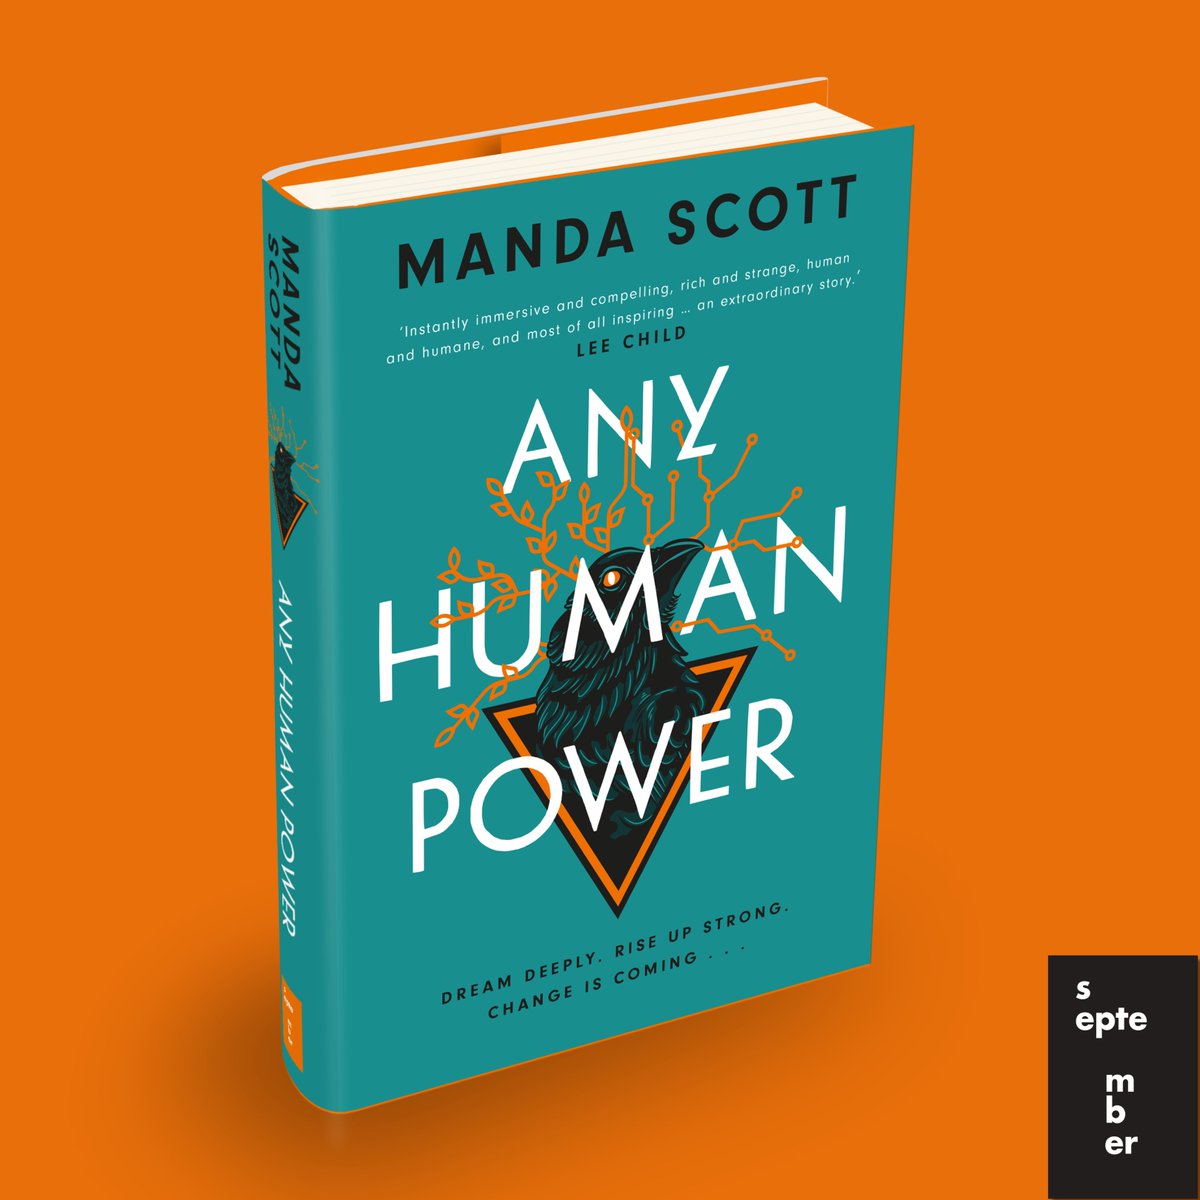 #AnyHumanPower is out today Lee Child - 'a Remarkable Story' Nathalie Nahai - 'a Clarion Call for our Times' listen to the podcast where we explore what it means and why: accidentalgods.life/any-human-powe… @Septemberbooks #GE24 #ChangeIsComing